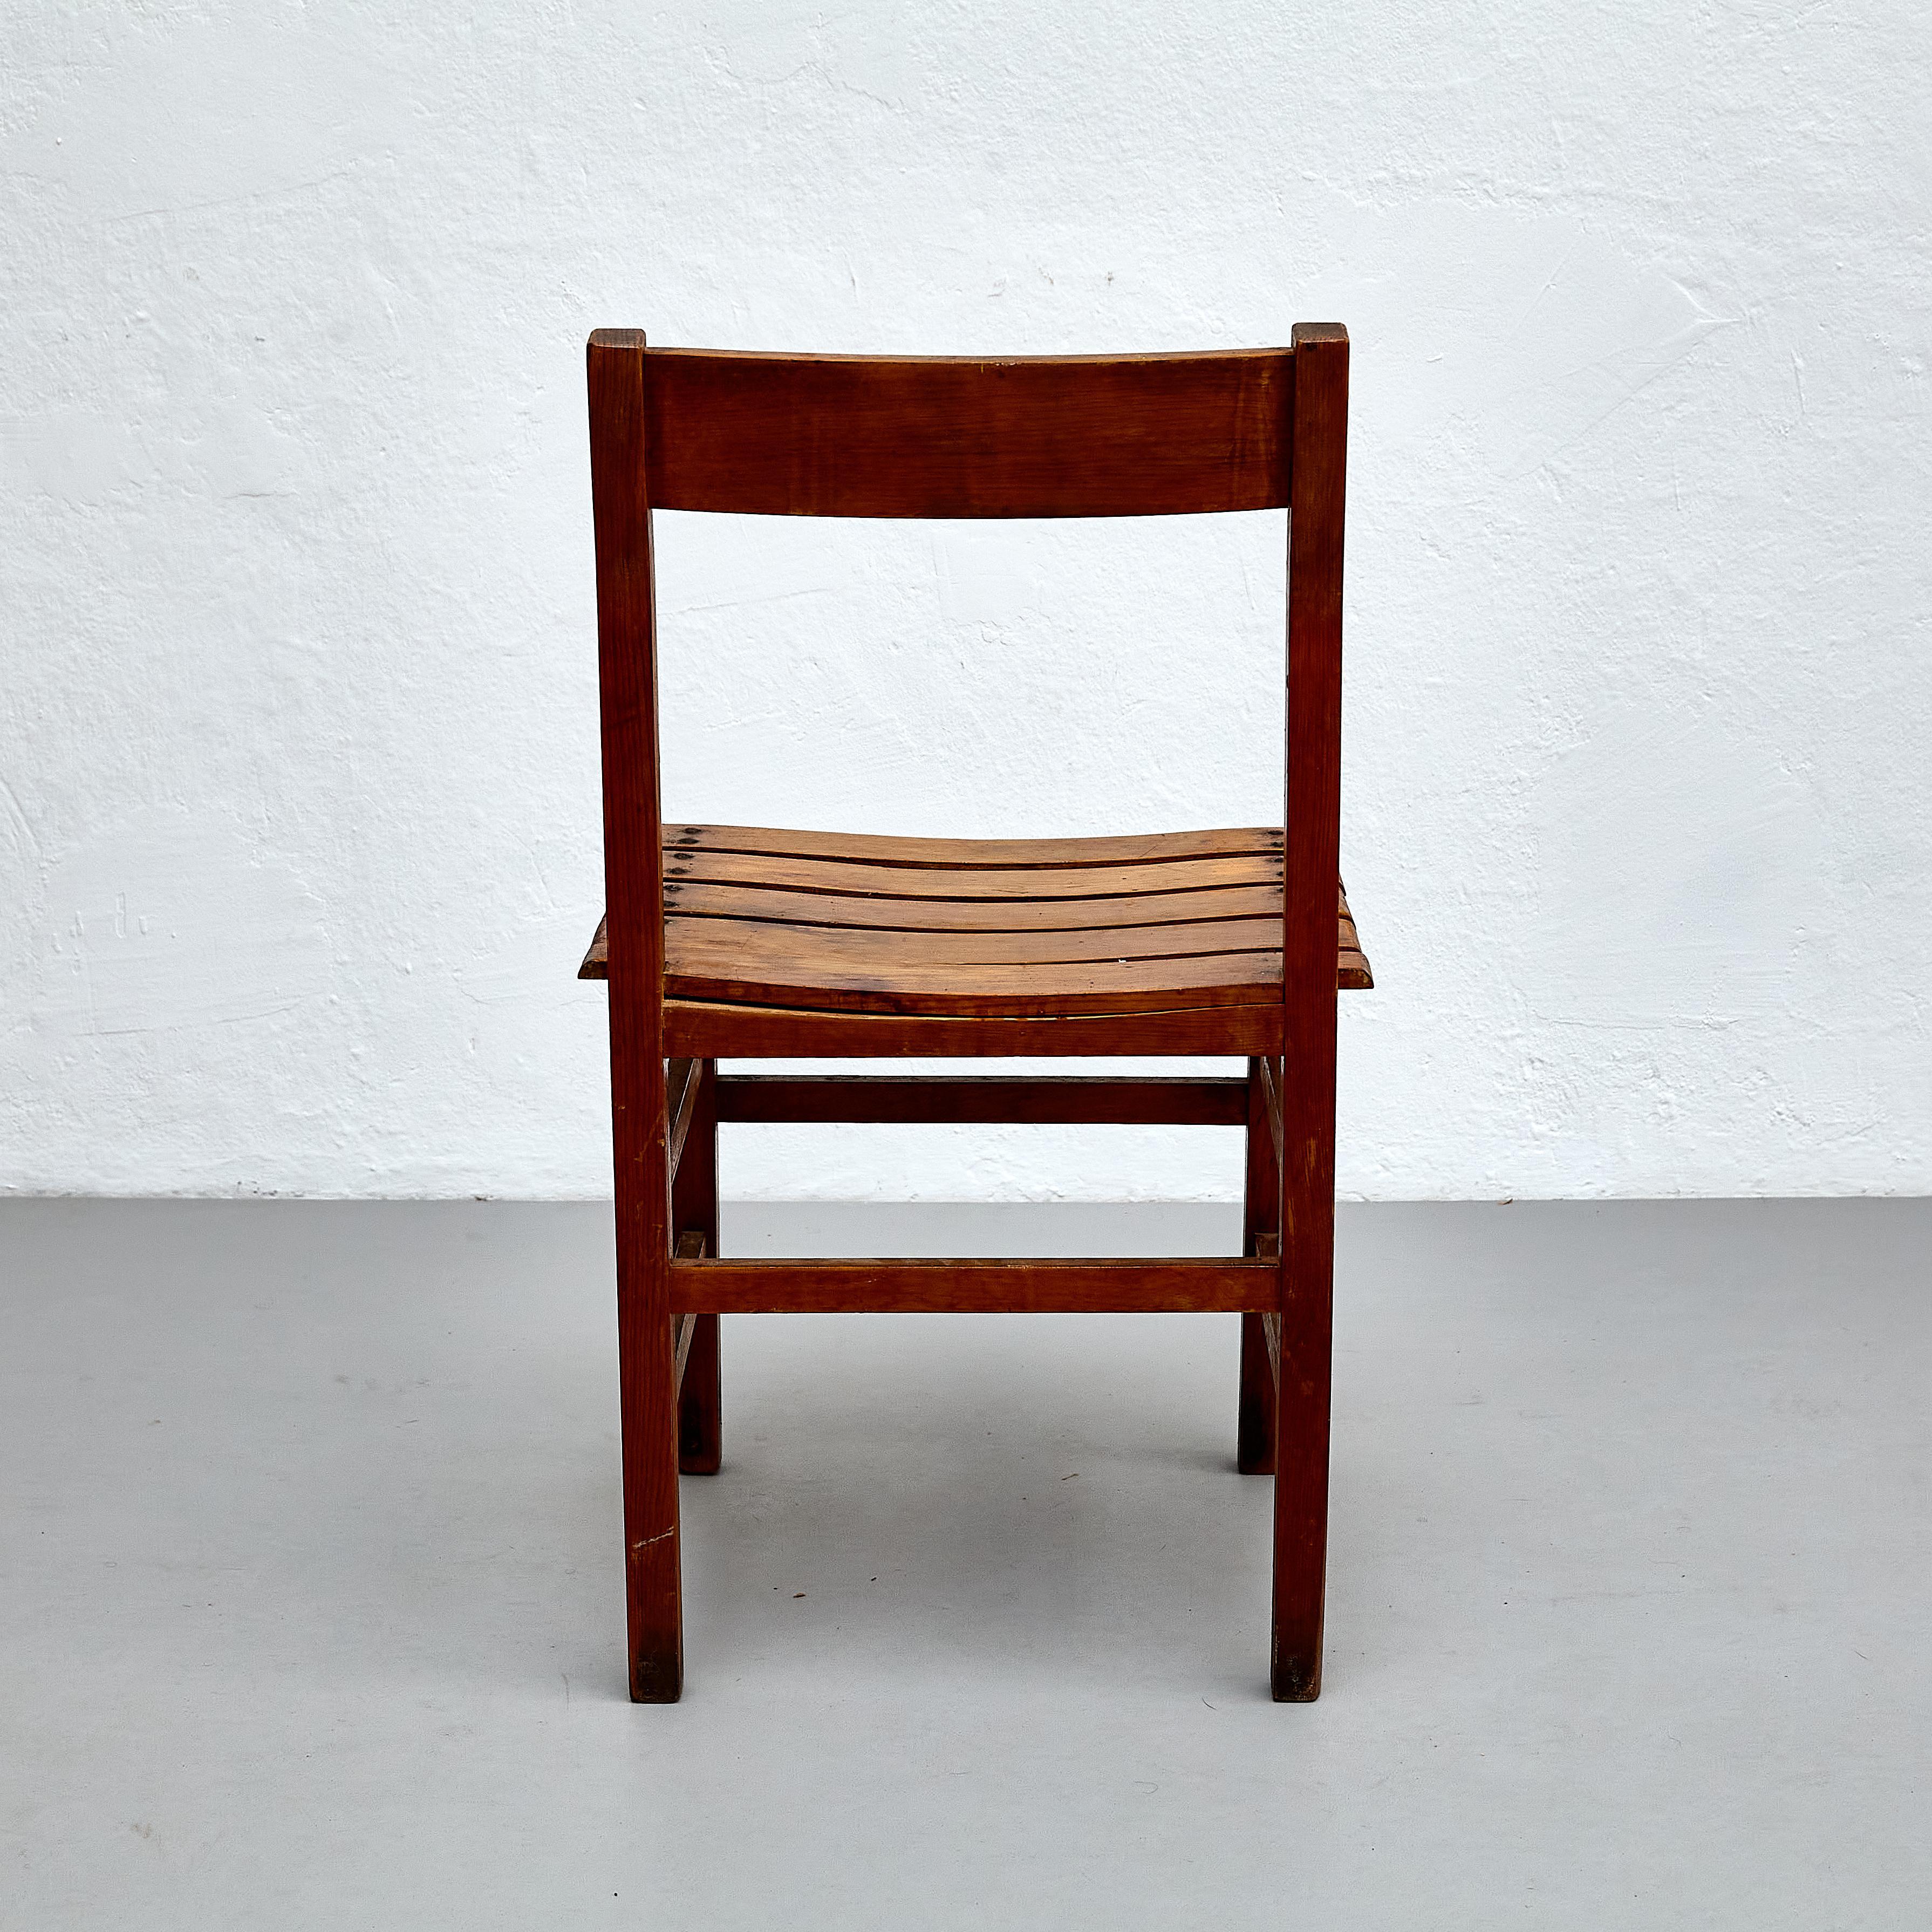 Set of Four Mid-Century Modern Rationalist Wood Chairs, Rustic Charm, circa 1960 For Sale 5